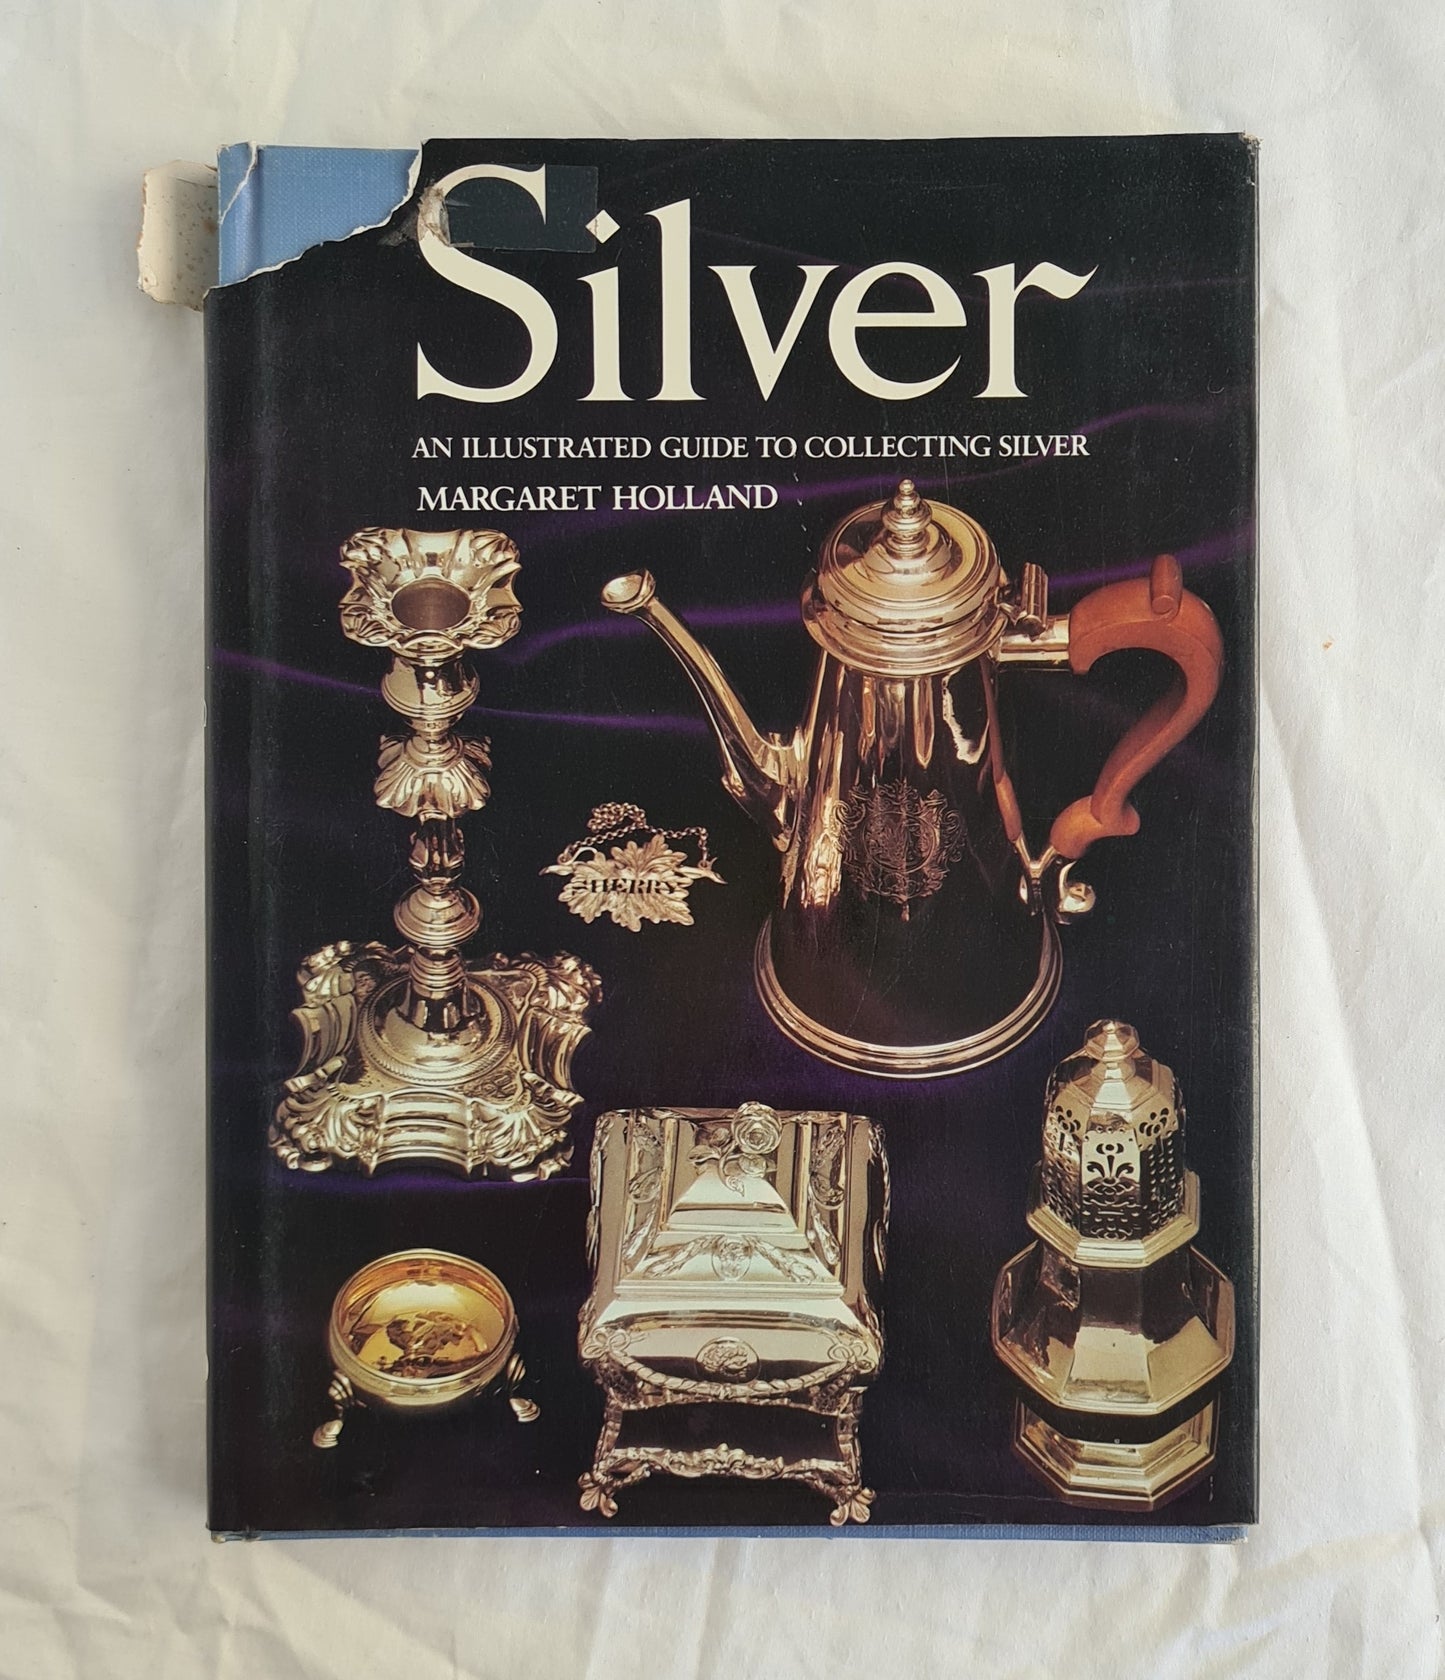 Silver  An Illustrated Guide to Collecting Silver  by Margaret Holland